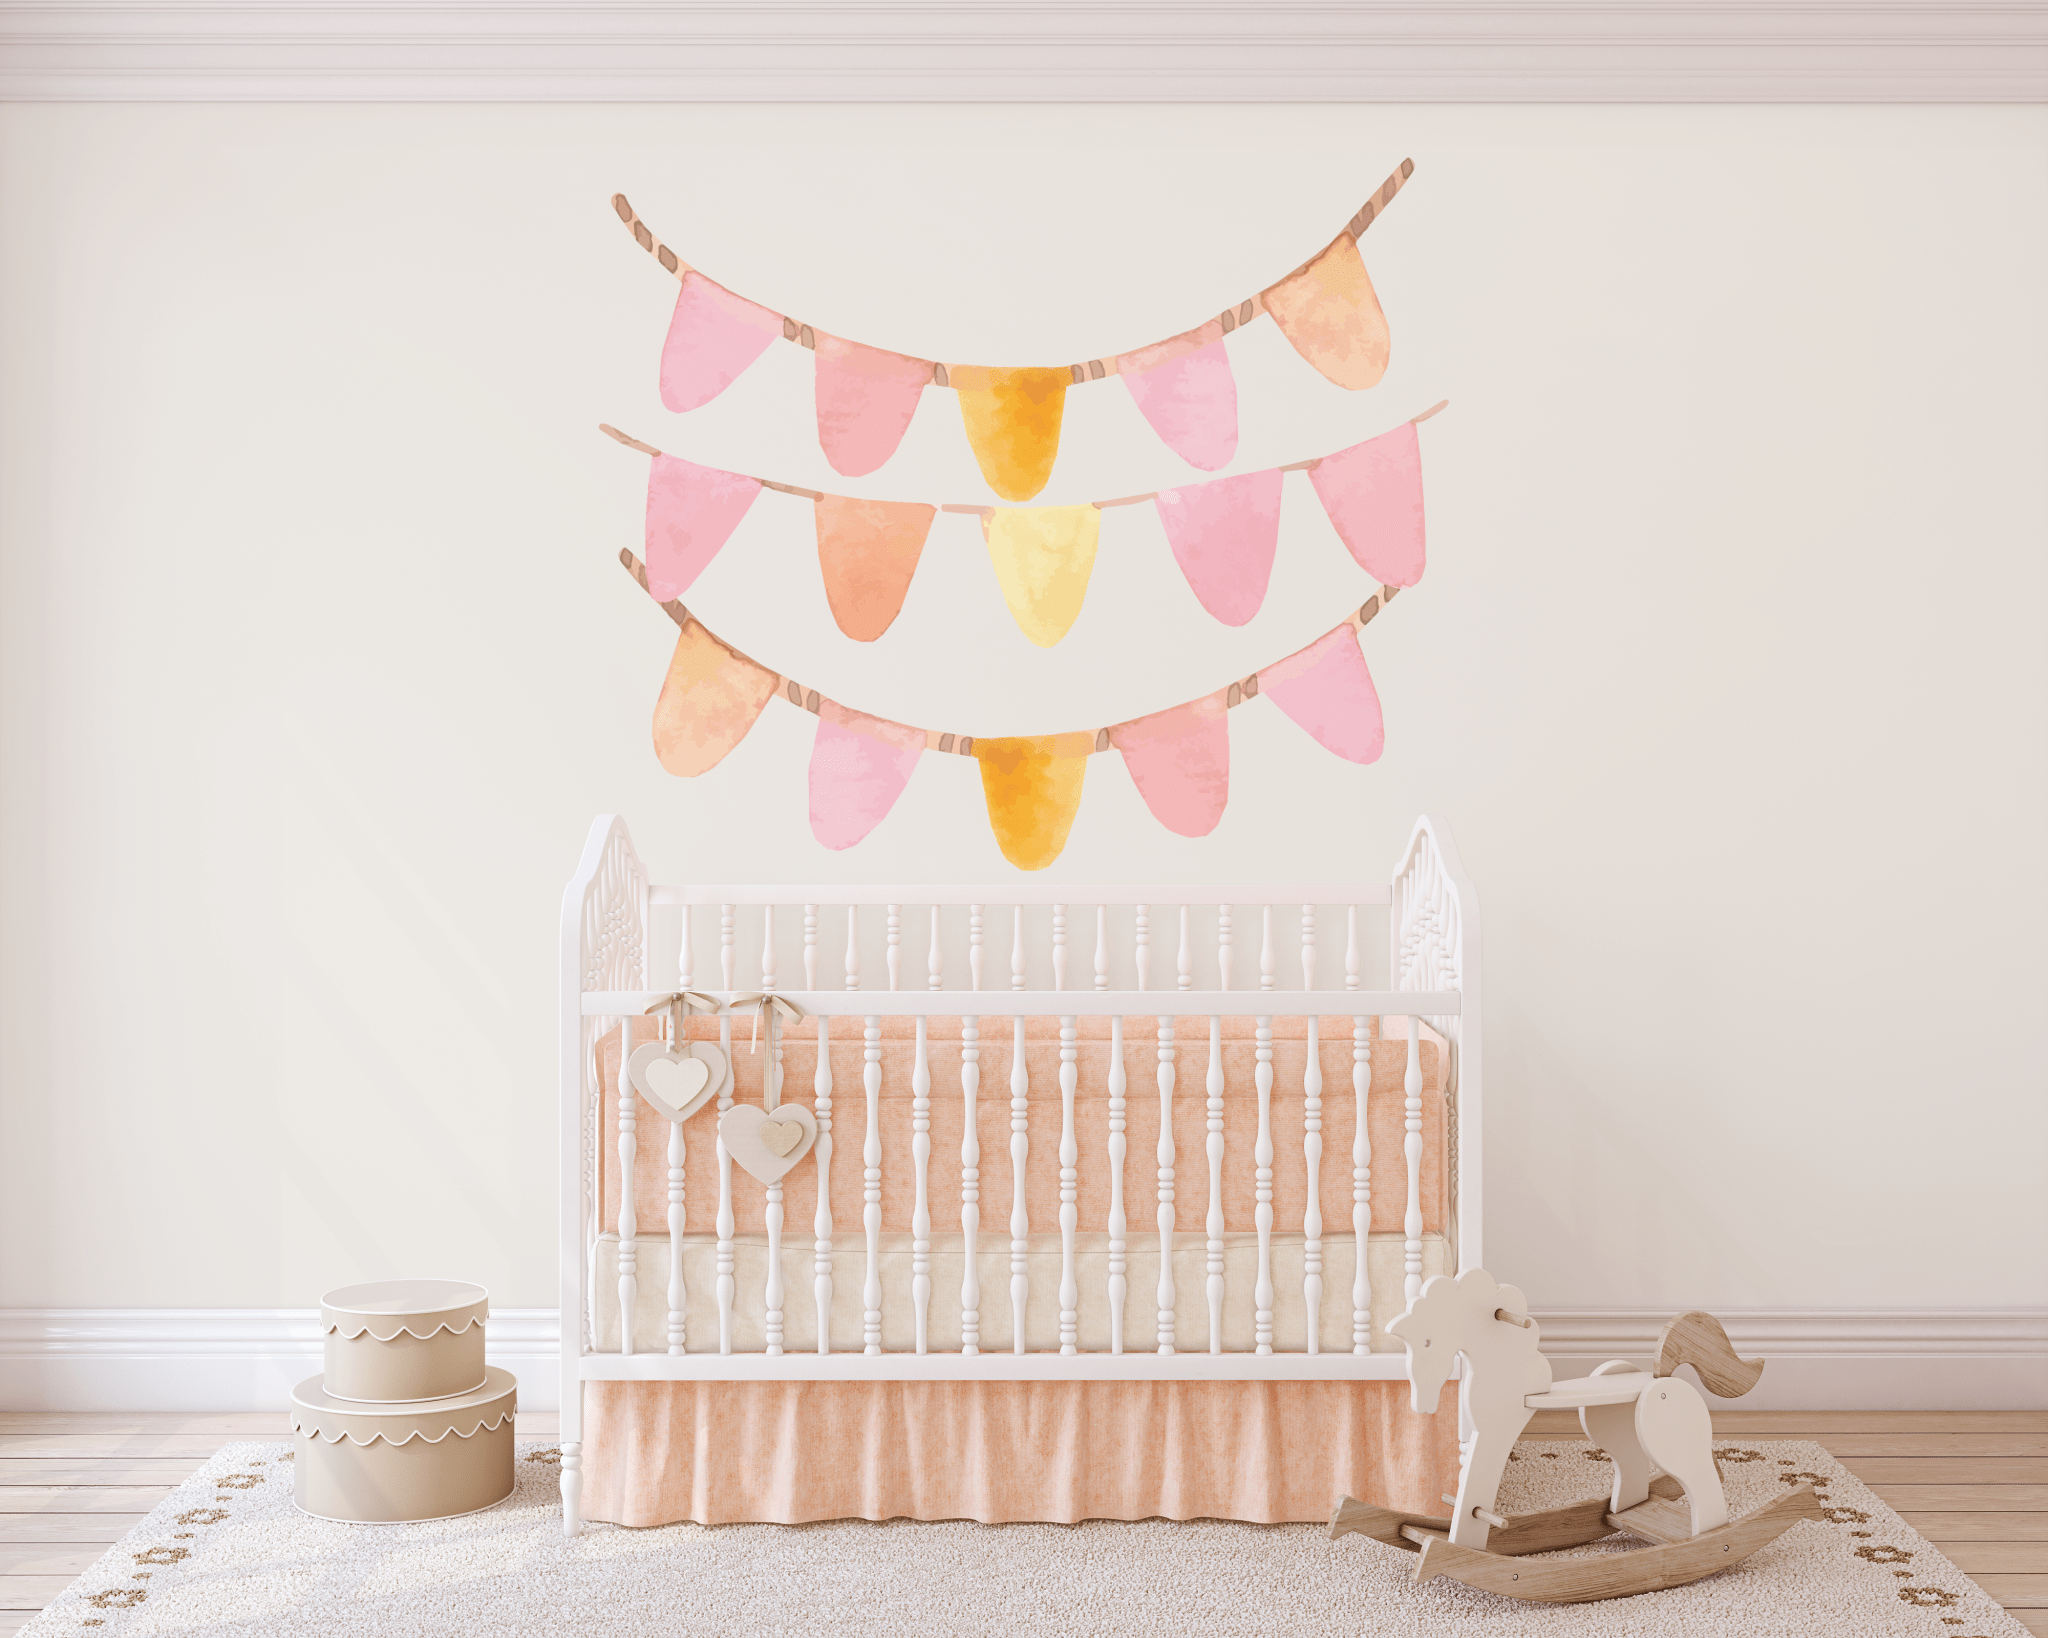 A nursery room with a white crib adorned with two heart-shaped ornaments. Above the crib, peel-and-stick bunting banners in pastel pink and yellow hues are displayed on the wall. To the crib's left are two stacked round storage boxes, and to the right is a wooden rocking horse on a rug